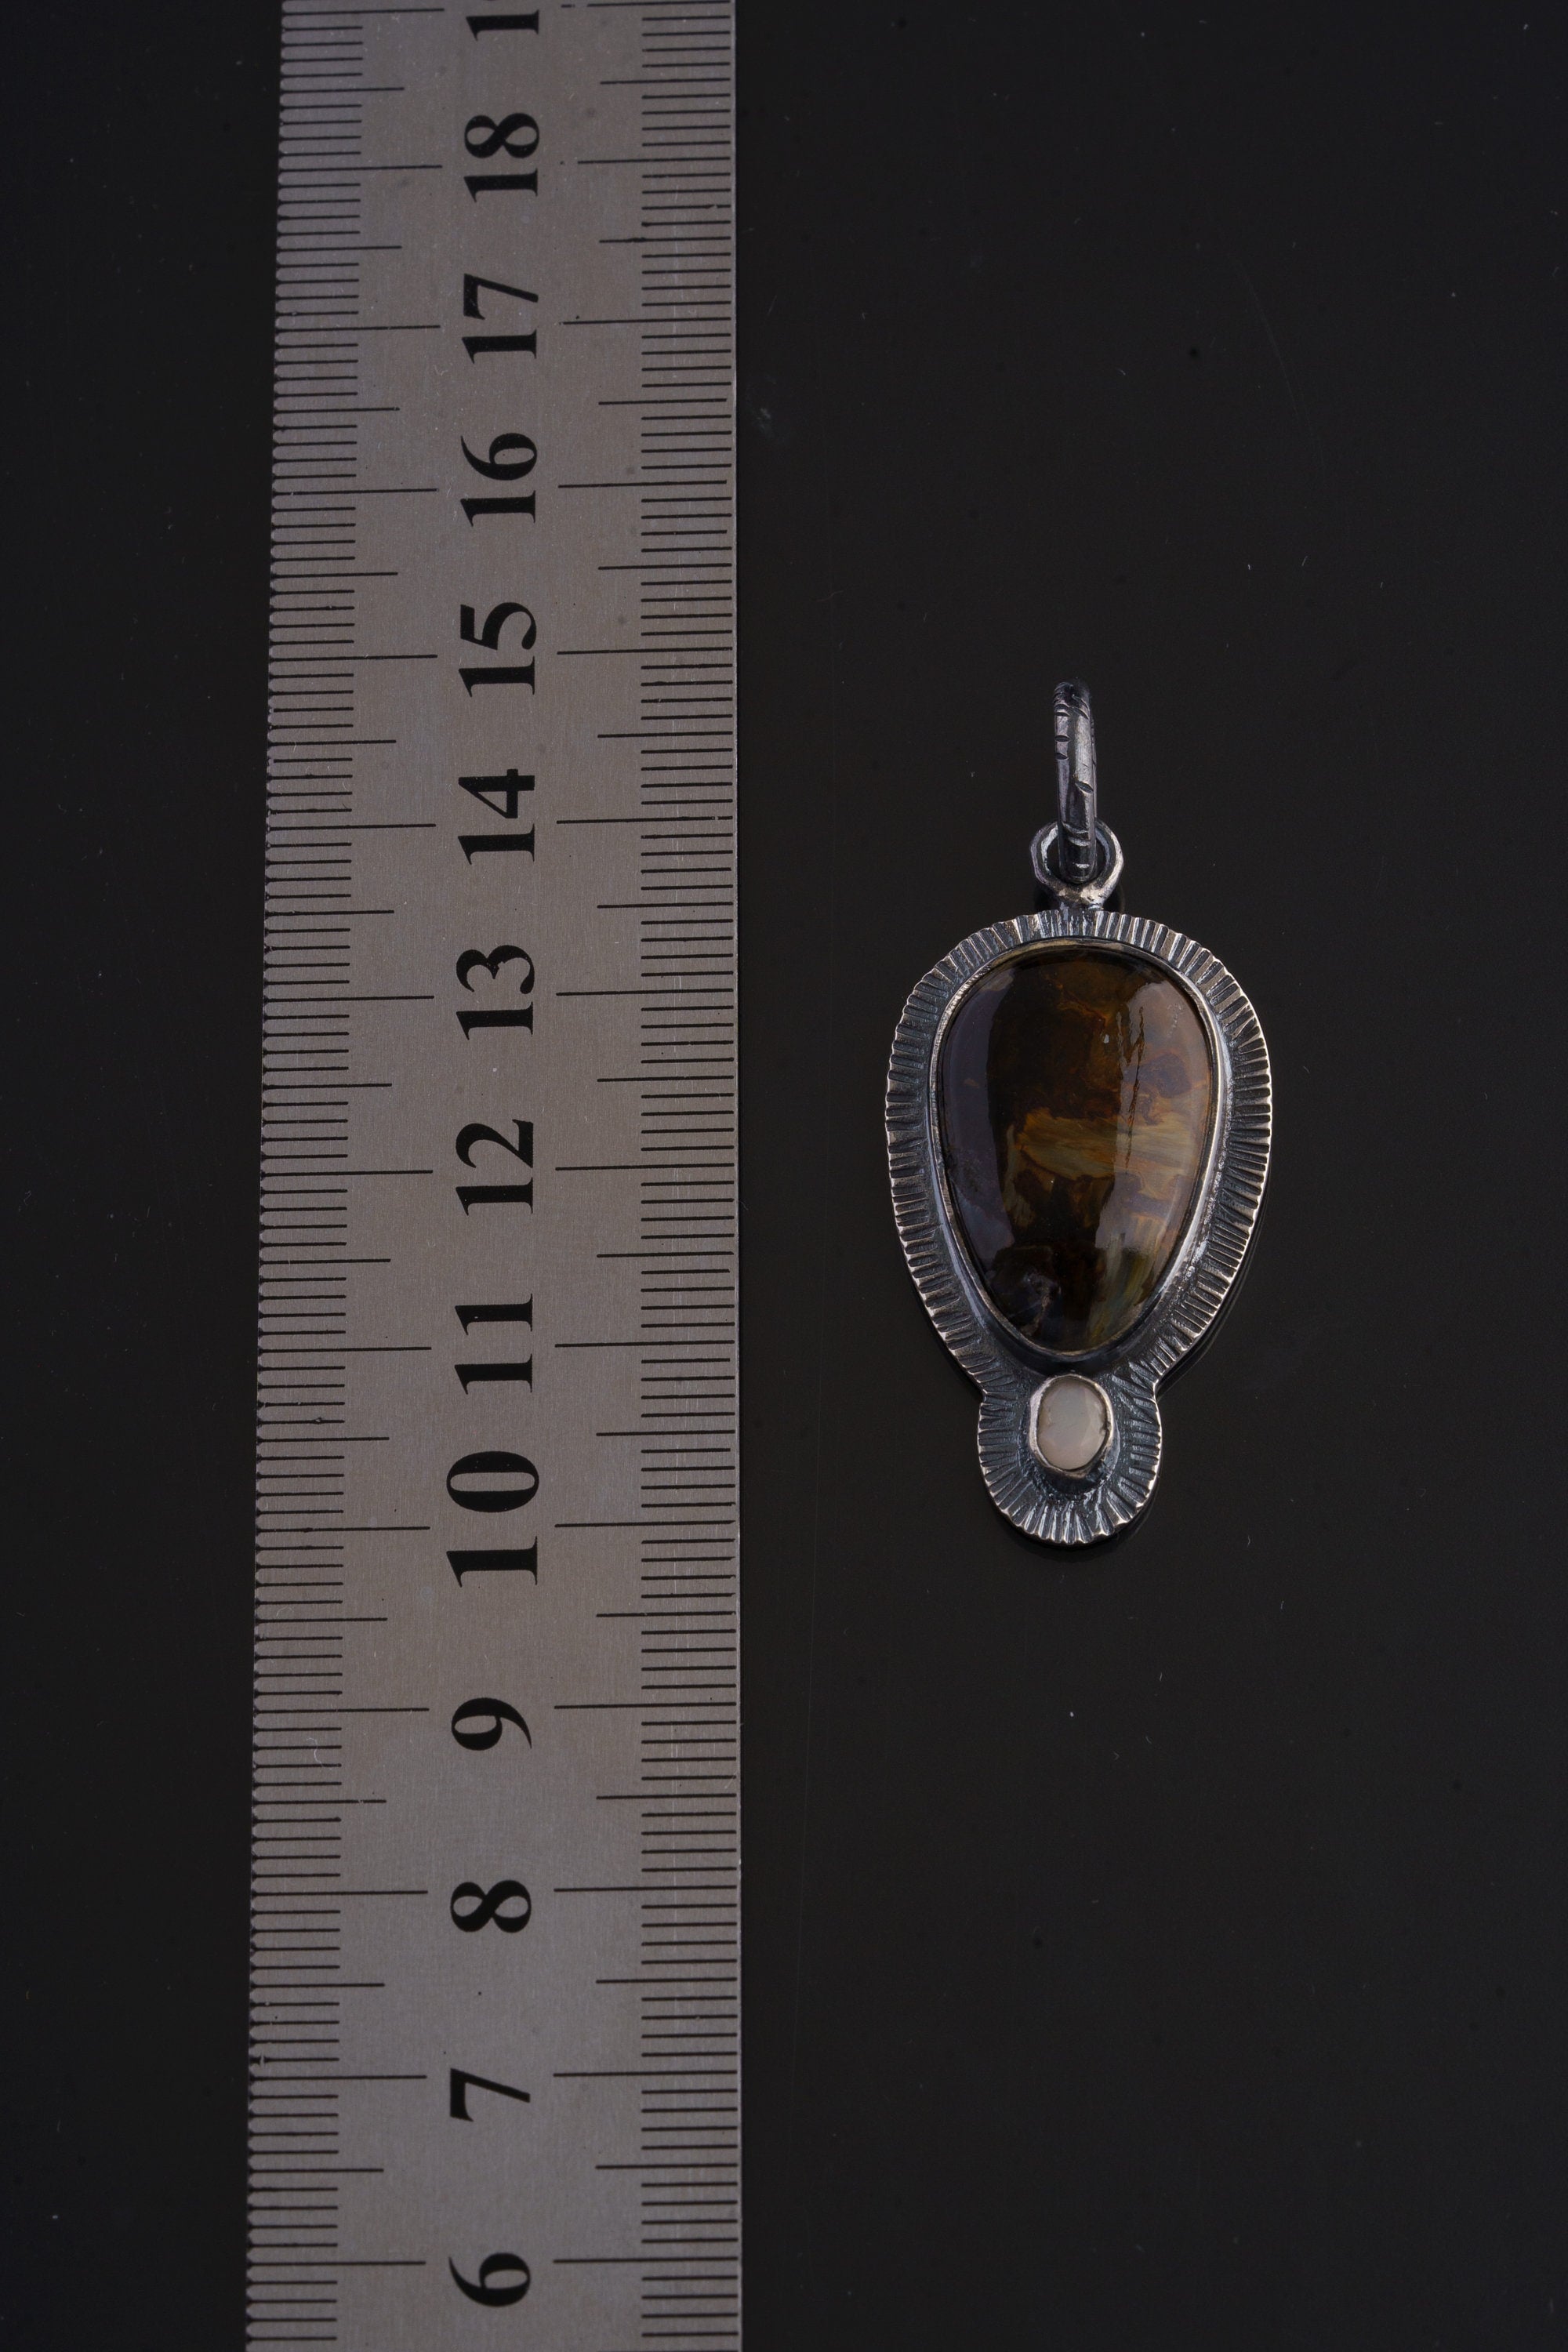 Earthbound Radiance - Grounding Pietersite and Ethiopian Opal - Oxidised Sterling Silver Pendant with Sun Ray Details